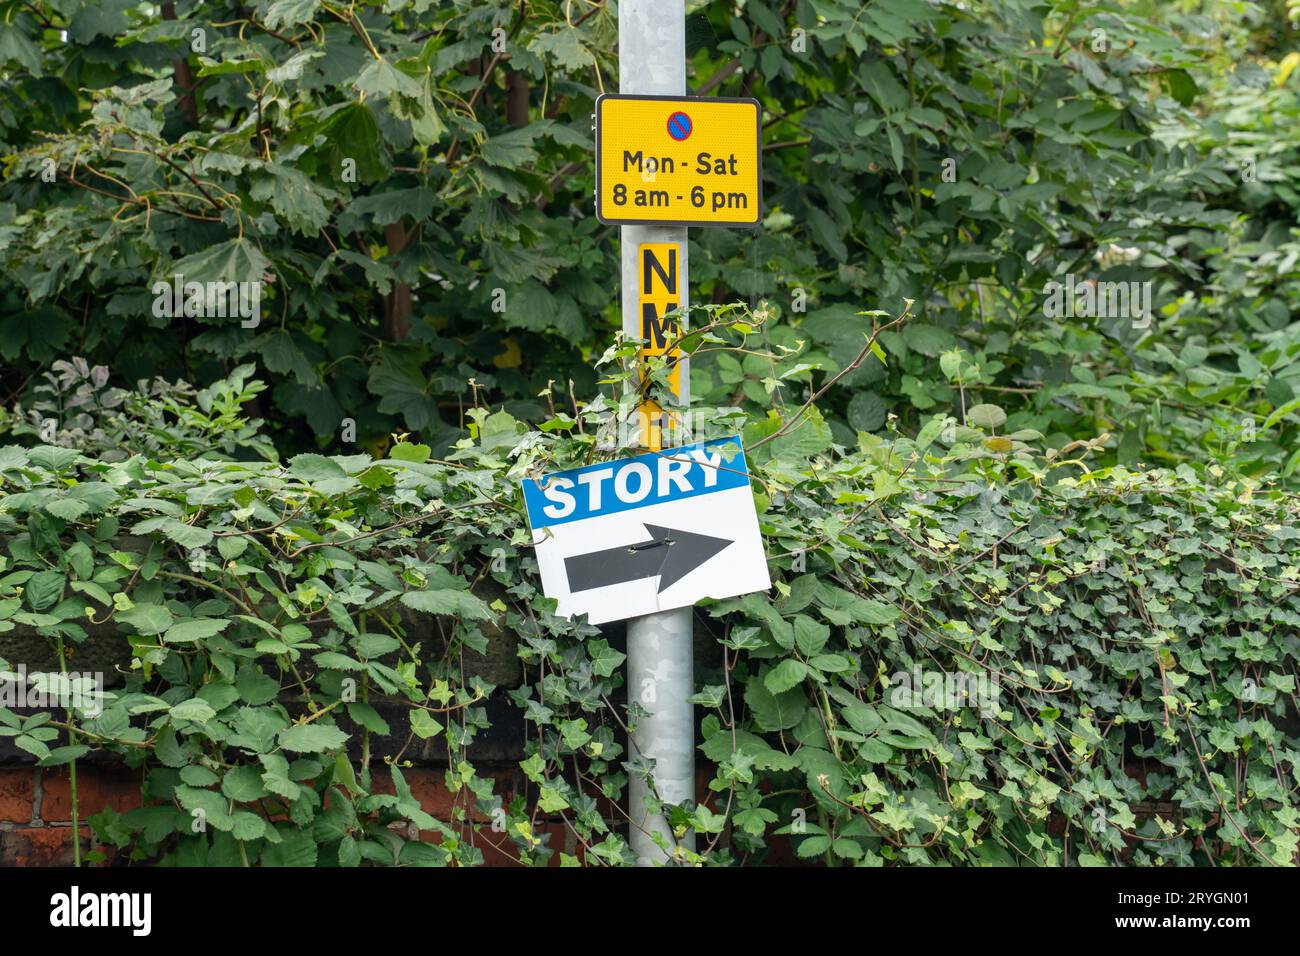 A sign on a lamp post indicates direction for deliveries to Story -  construction and infrastructure company, in Middlesbrough, UK Stock Photo